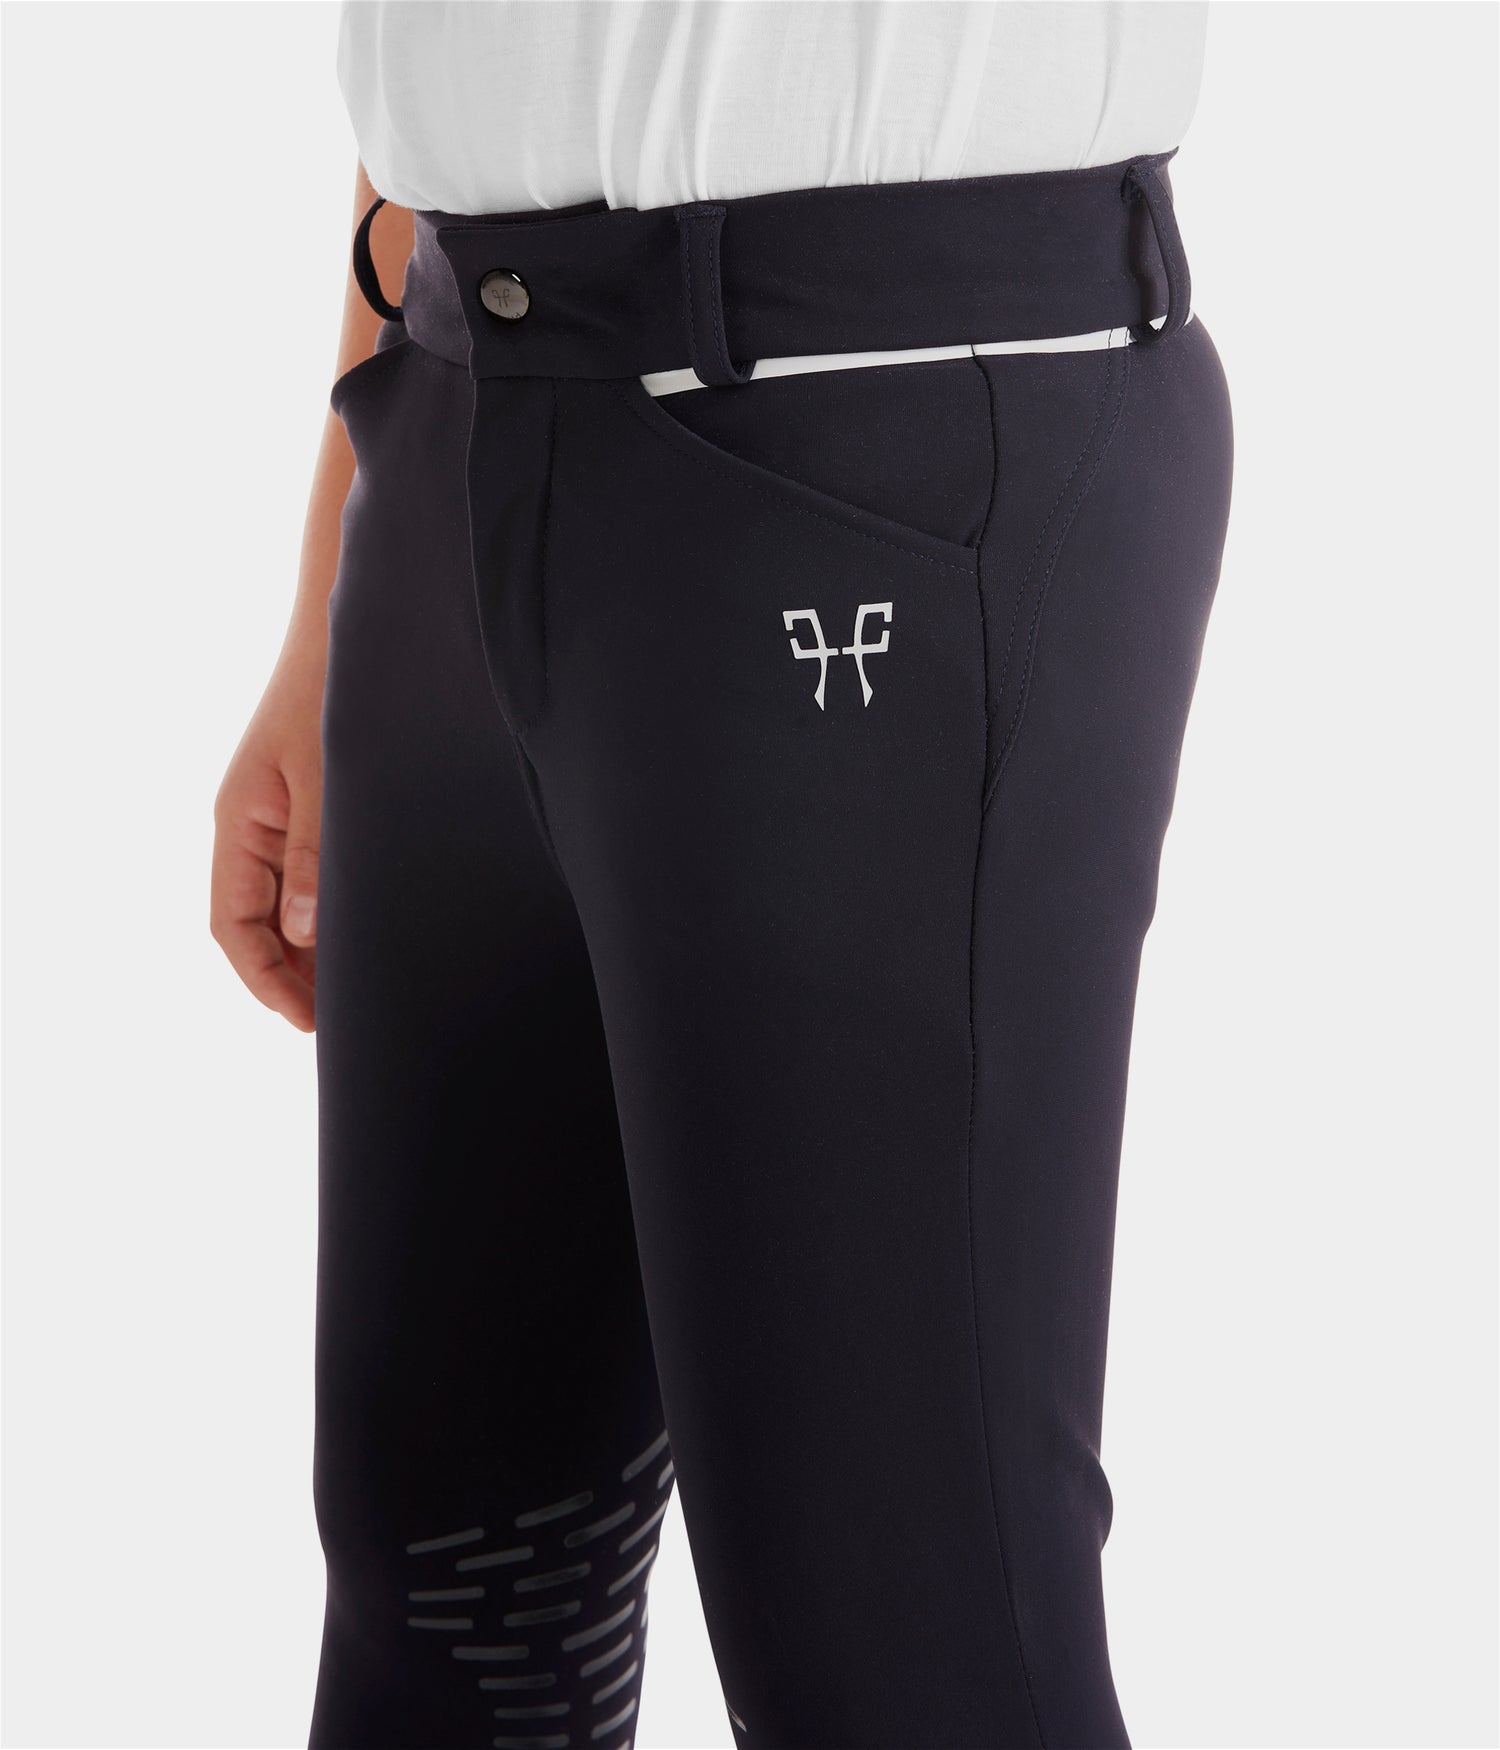 Horse riding pants for young boys